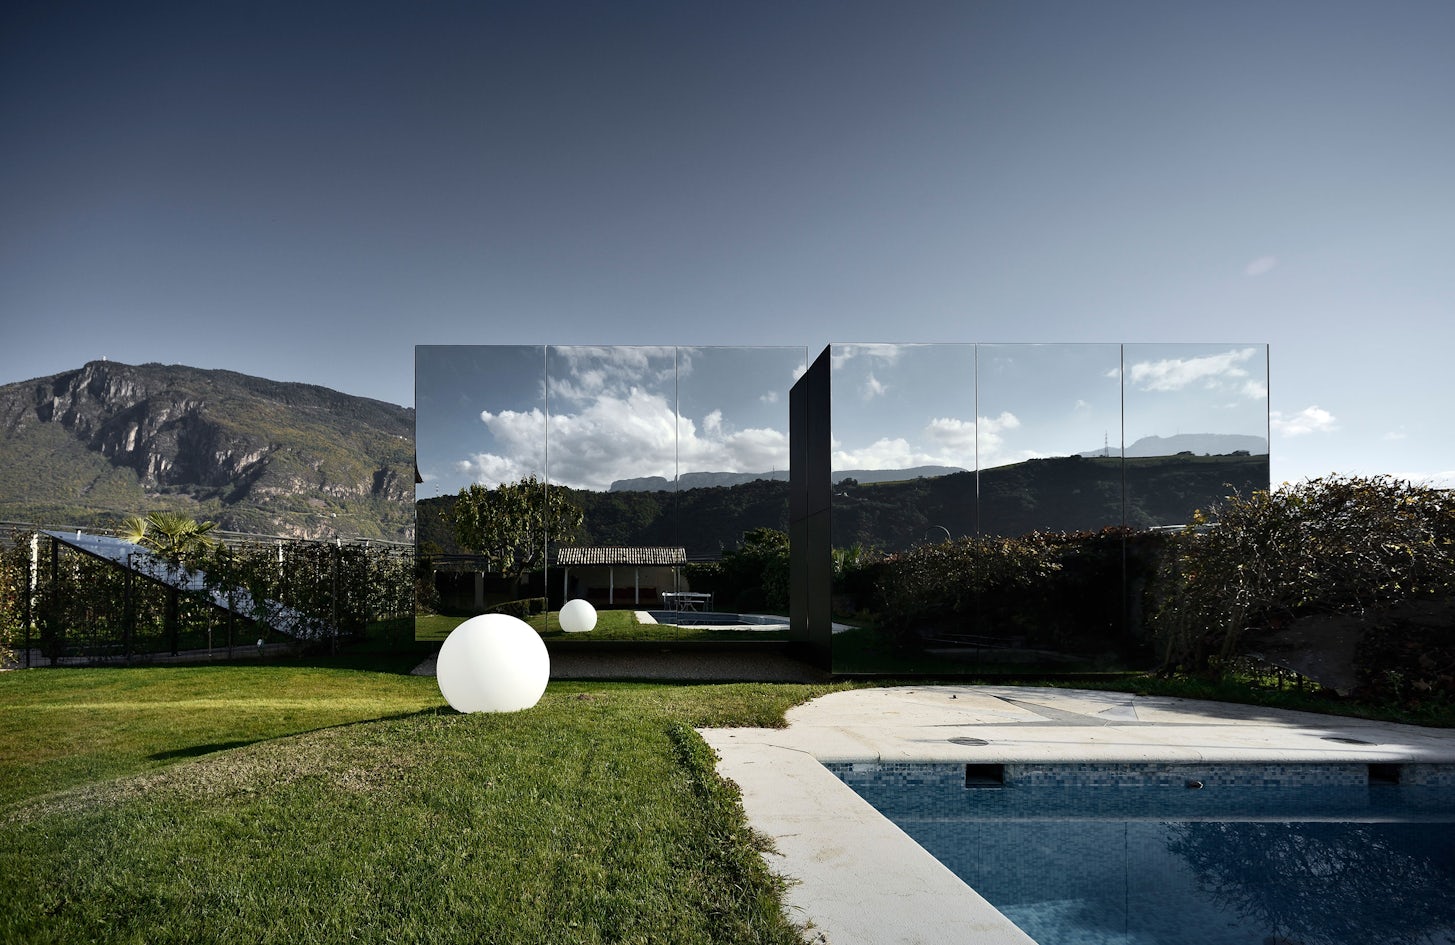 7 Ways to Enliven Your Next Project With Mirrored Glass - Architizer Journal